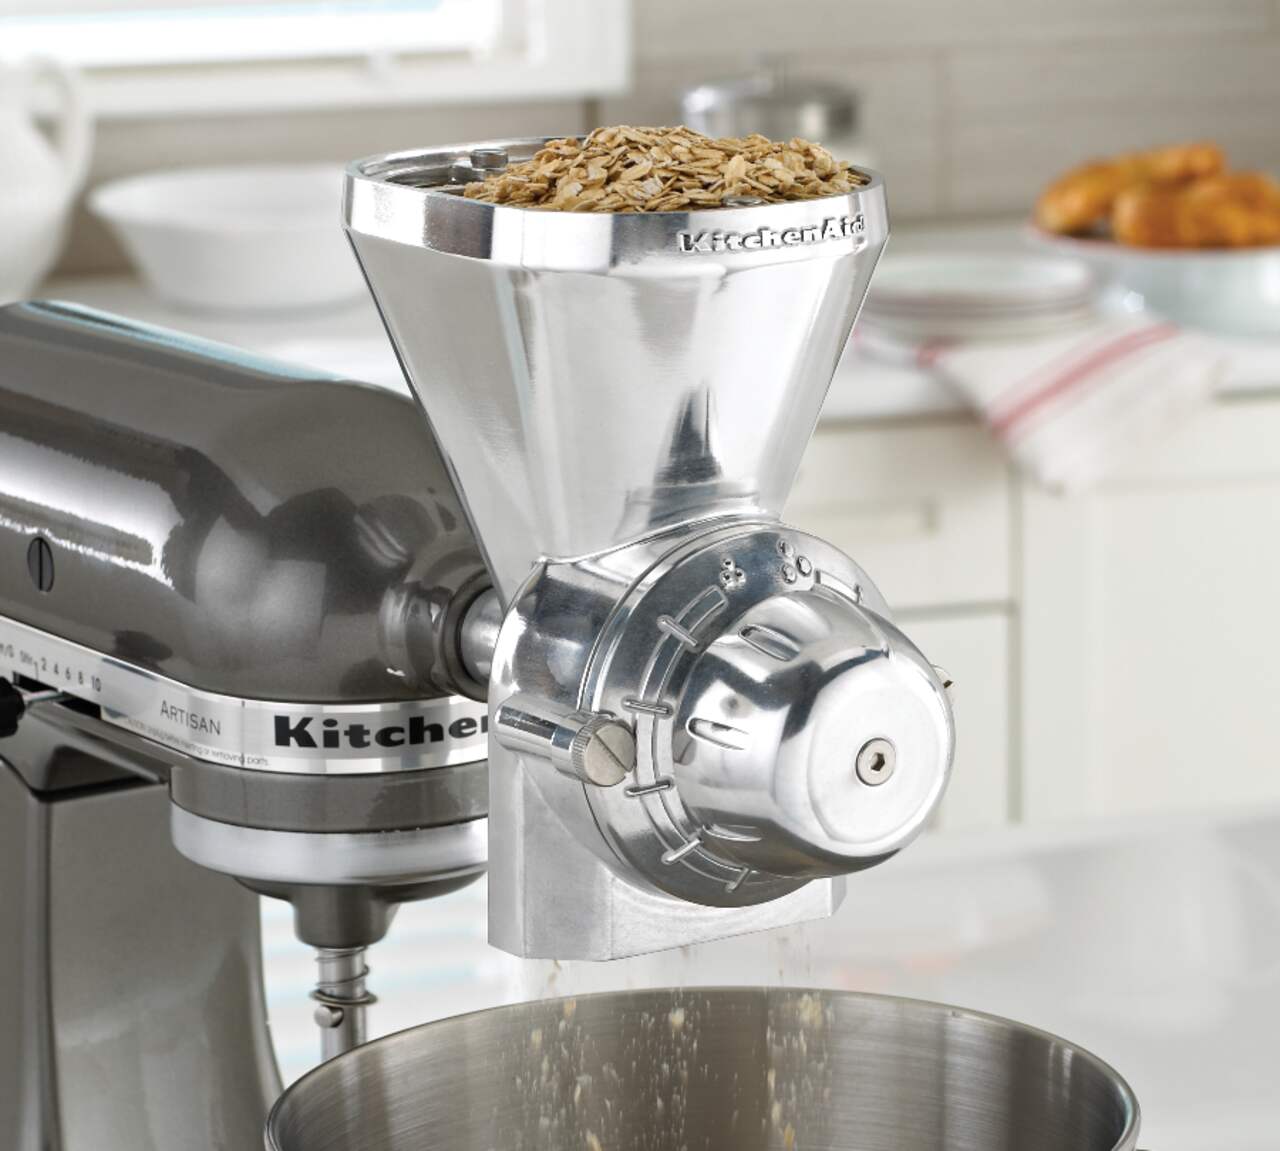 https://media-www.canadiantire.ca/product/living/kitchen/kitchen-appliances/0431435/kitchen-aid-grain-mill-3dd3f814-2fce-4f66-ab76-7a760e1f9a99.png?imdensity=1&imwidth=1244&impolicy=mZoom